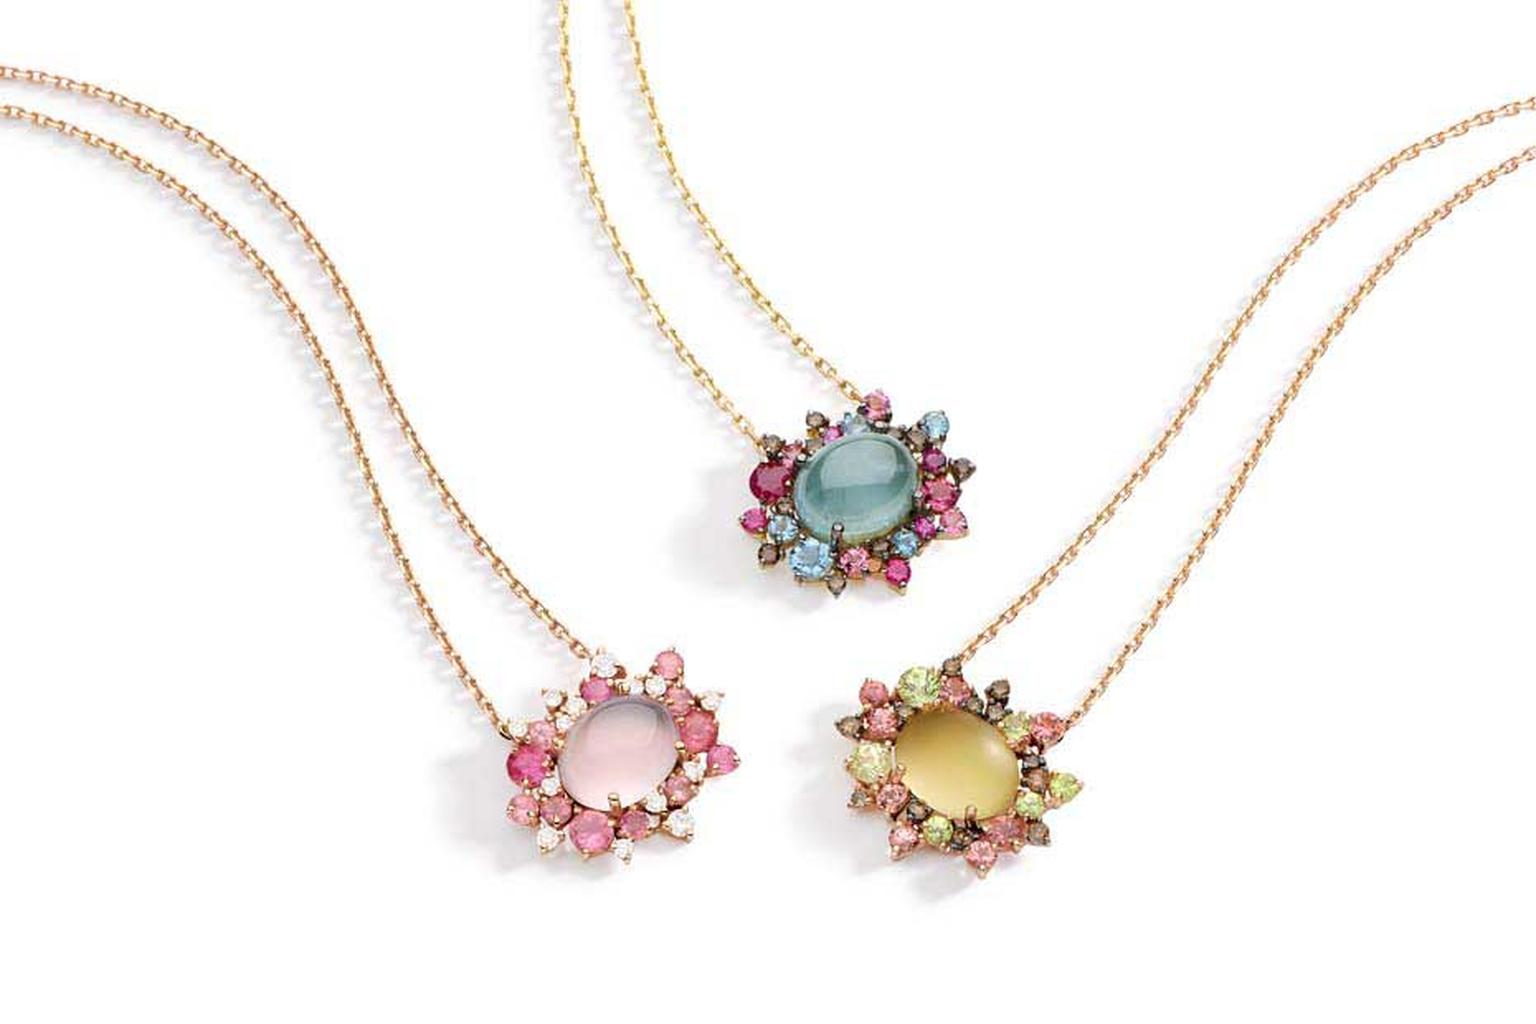 Brumani Baobab collection necklaces in yellow gold features a trio of colour combinations, including round brown and white diamonds, aquamarine, rose, smoky and lemon quartz, ruby, pink tourmaline and mandarin garnet.